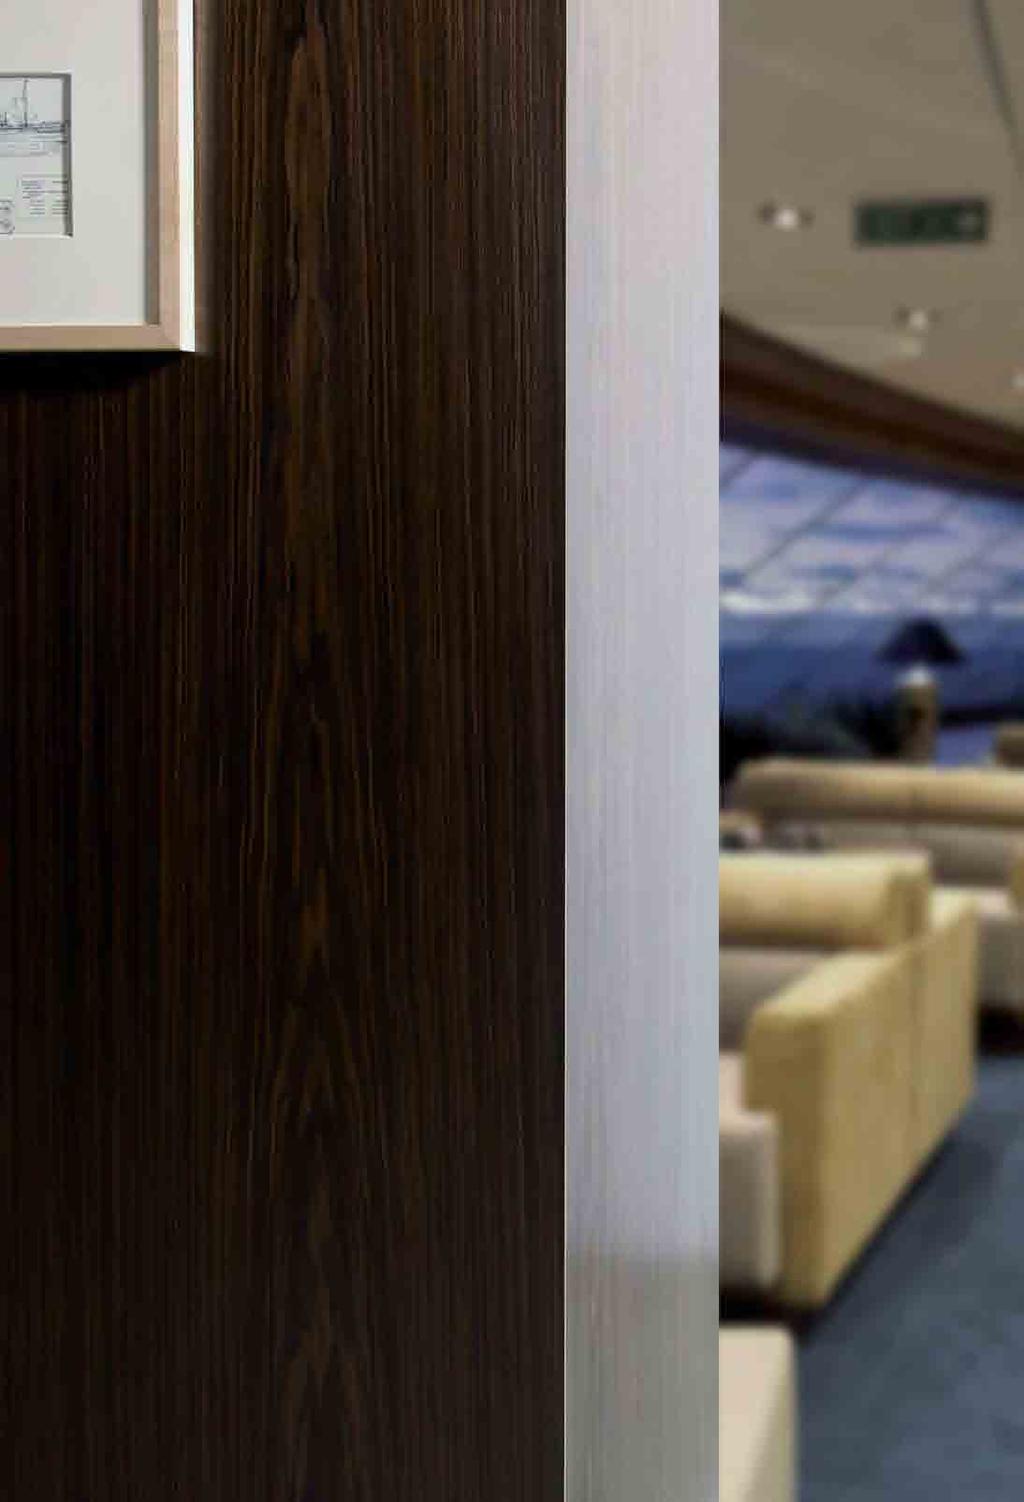 In auditoriums, restaurants, cruise ships and yachts, Formica Ligna is the perfect